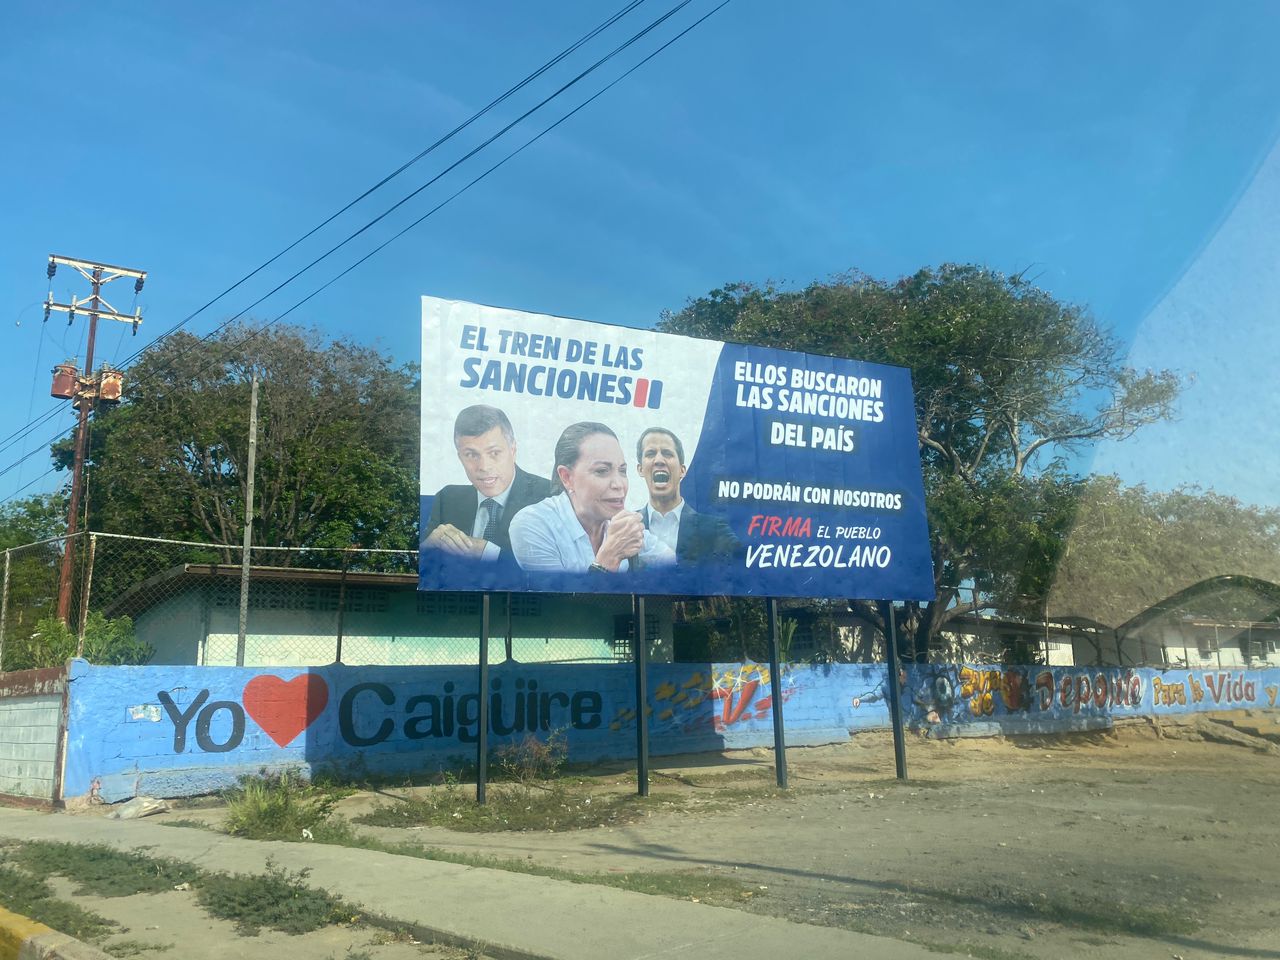 In Cumaná they reject the installation of billboards with Chavismo propaganda